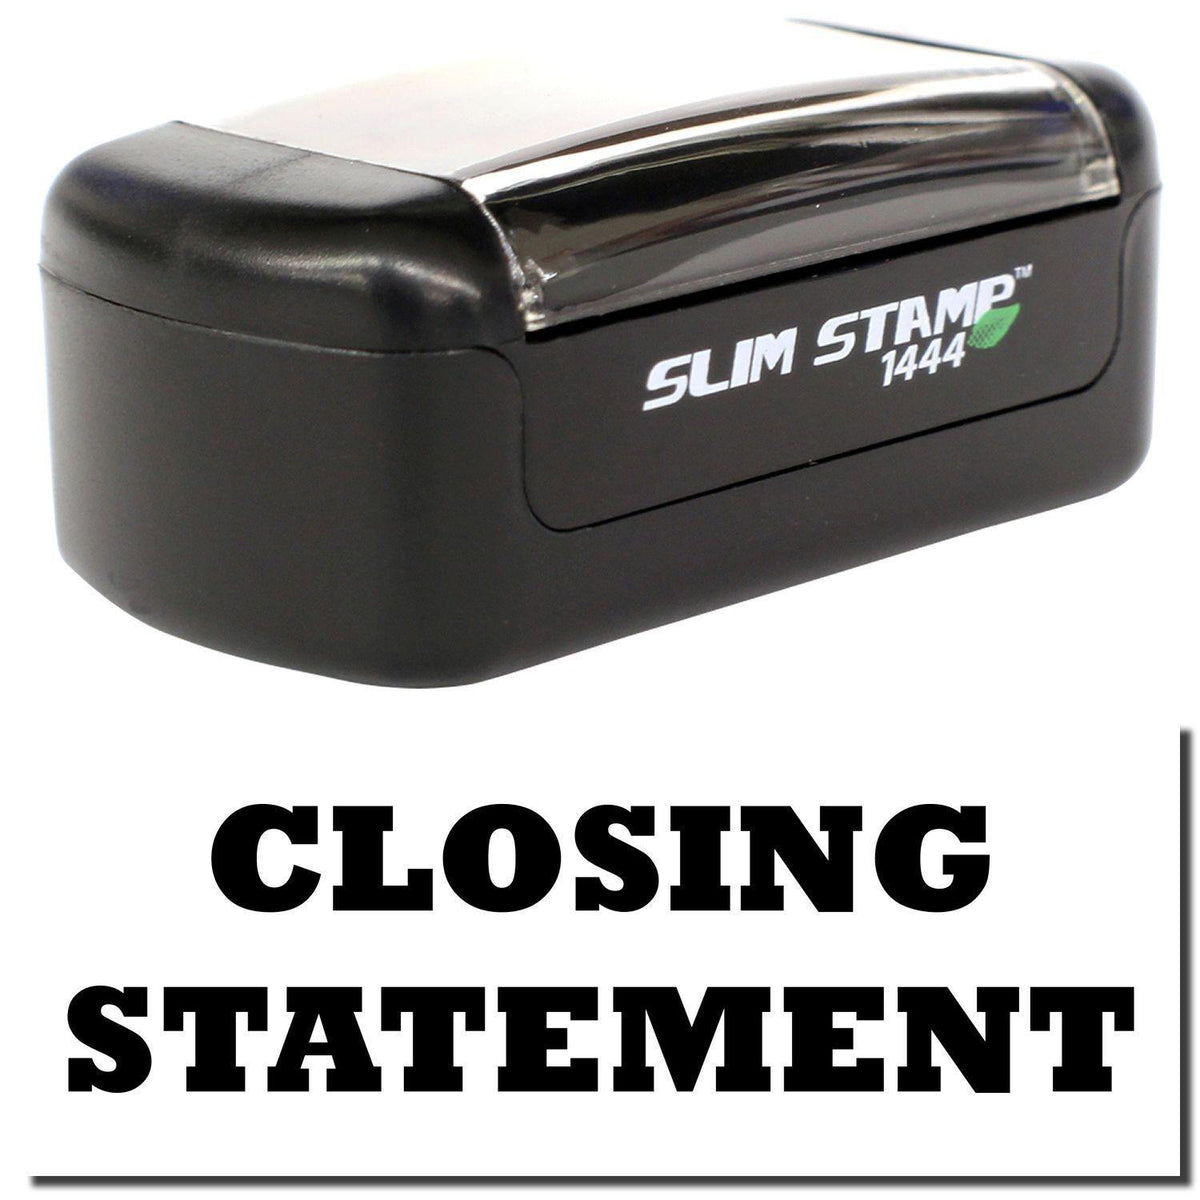 A stock office pre-inked stamp with a stamped image showing how the text &quot;CLOSING STATEMENT&quot; is displayed after stamping.